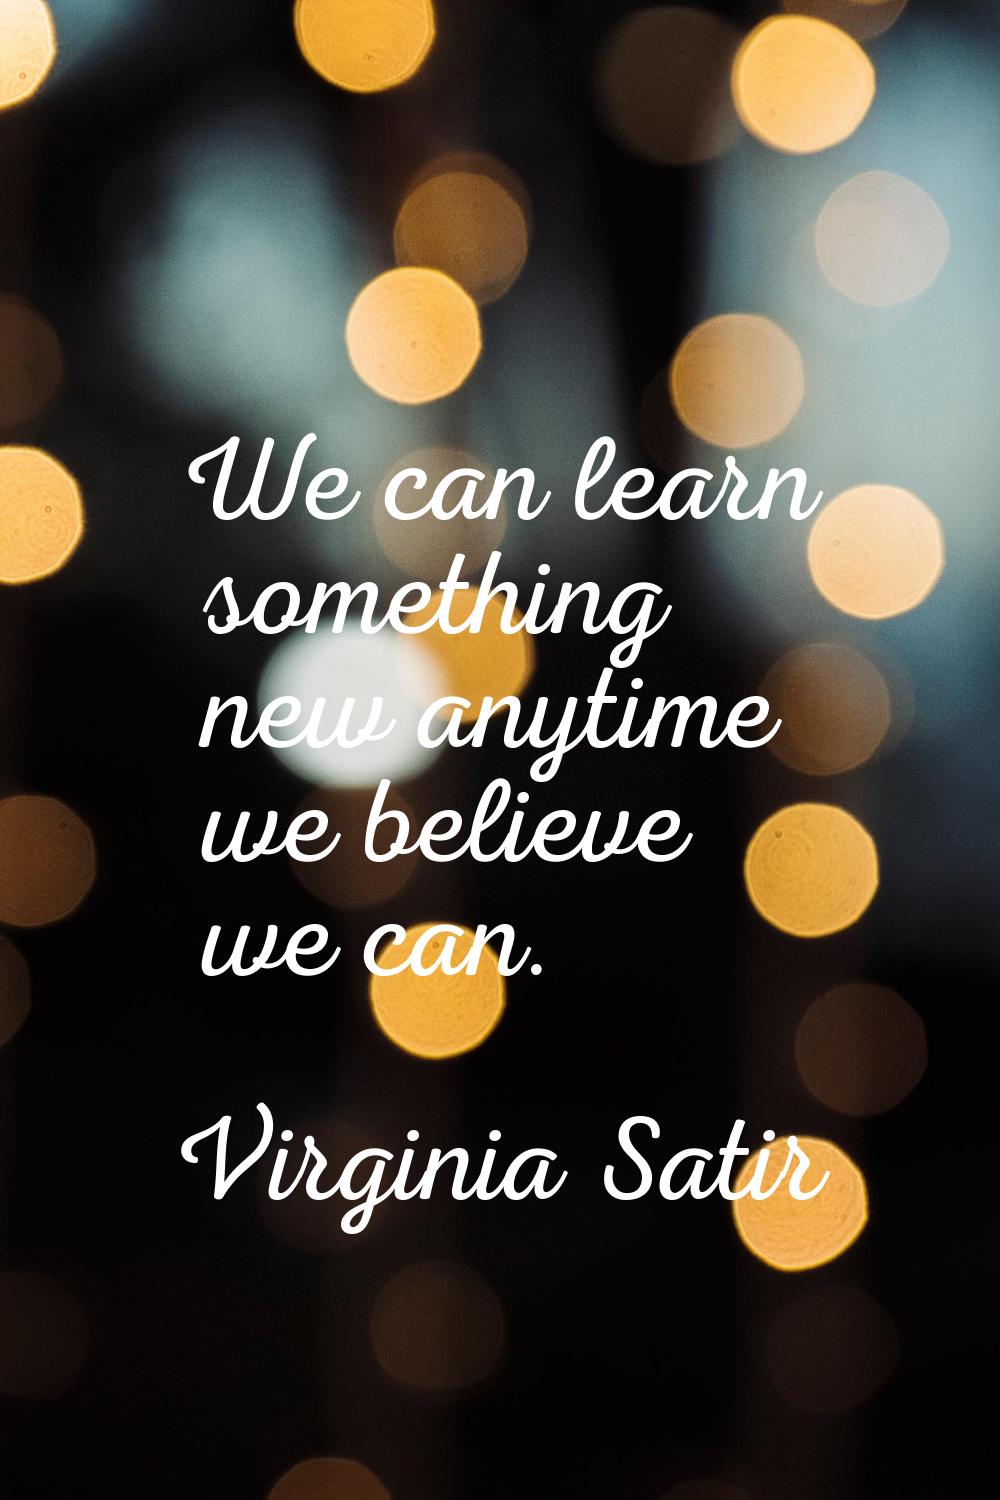 We can learn something new anytime we believe we can.